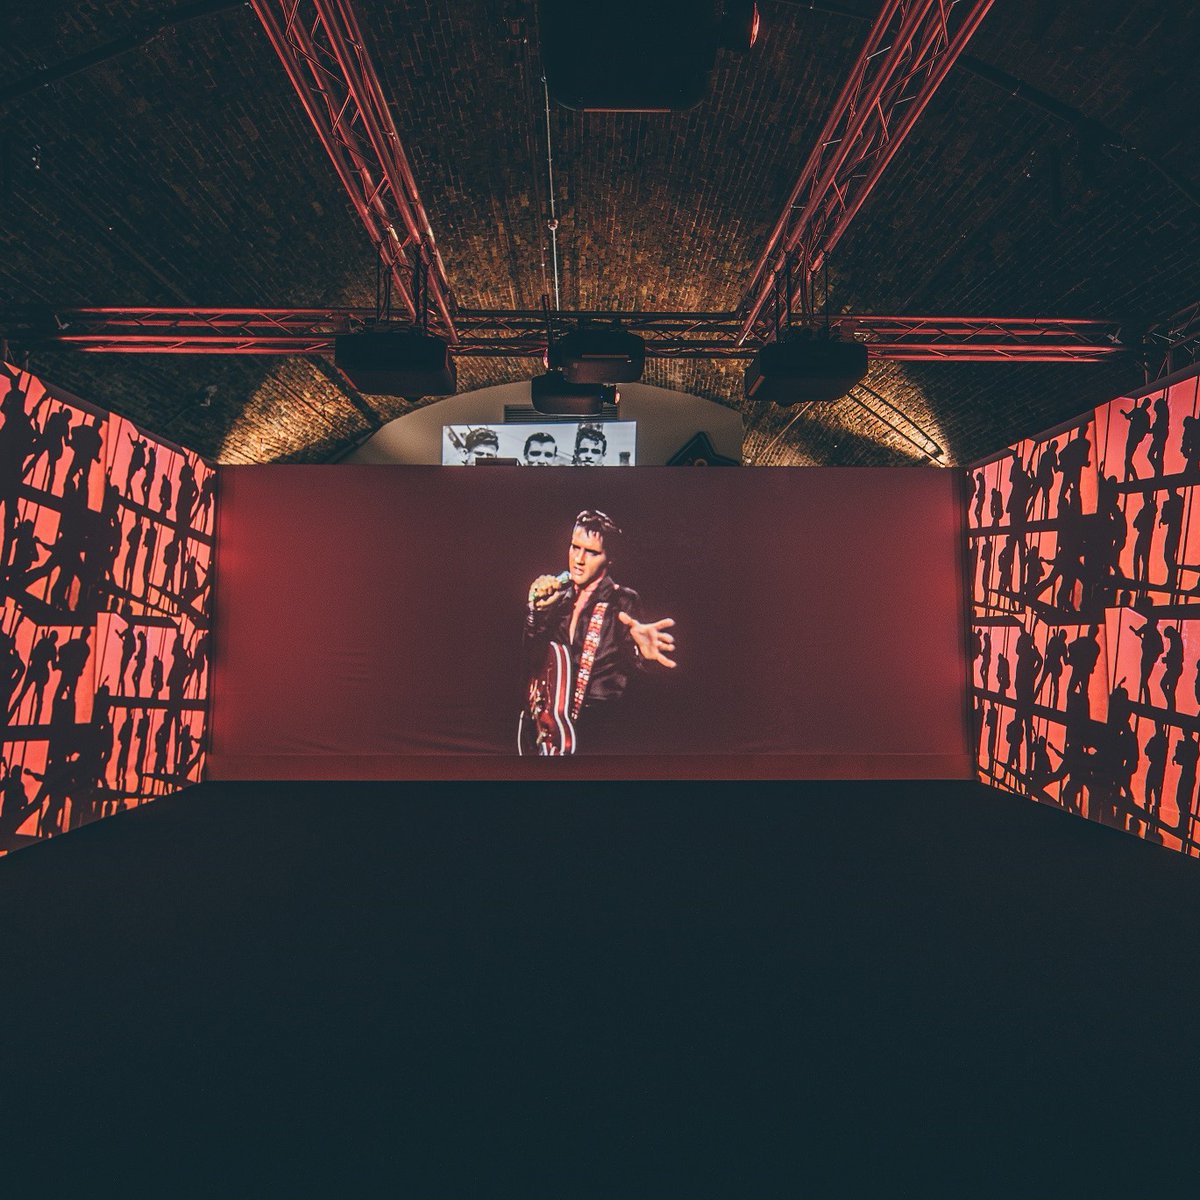 A special evening with The King of Rock ‘n Roll… Did you know that Arches London Bridge can be hired out for private events? ⚡ Link in bio to find out more. #workparty #partyvenue